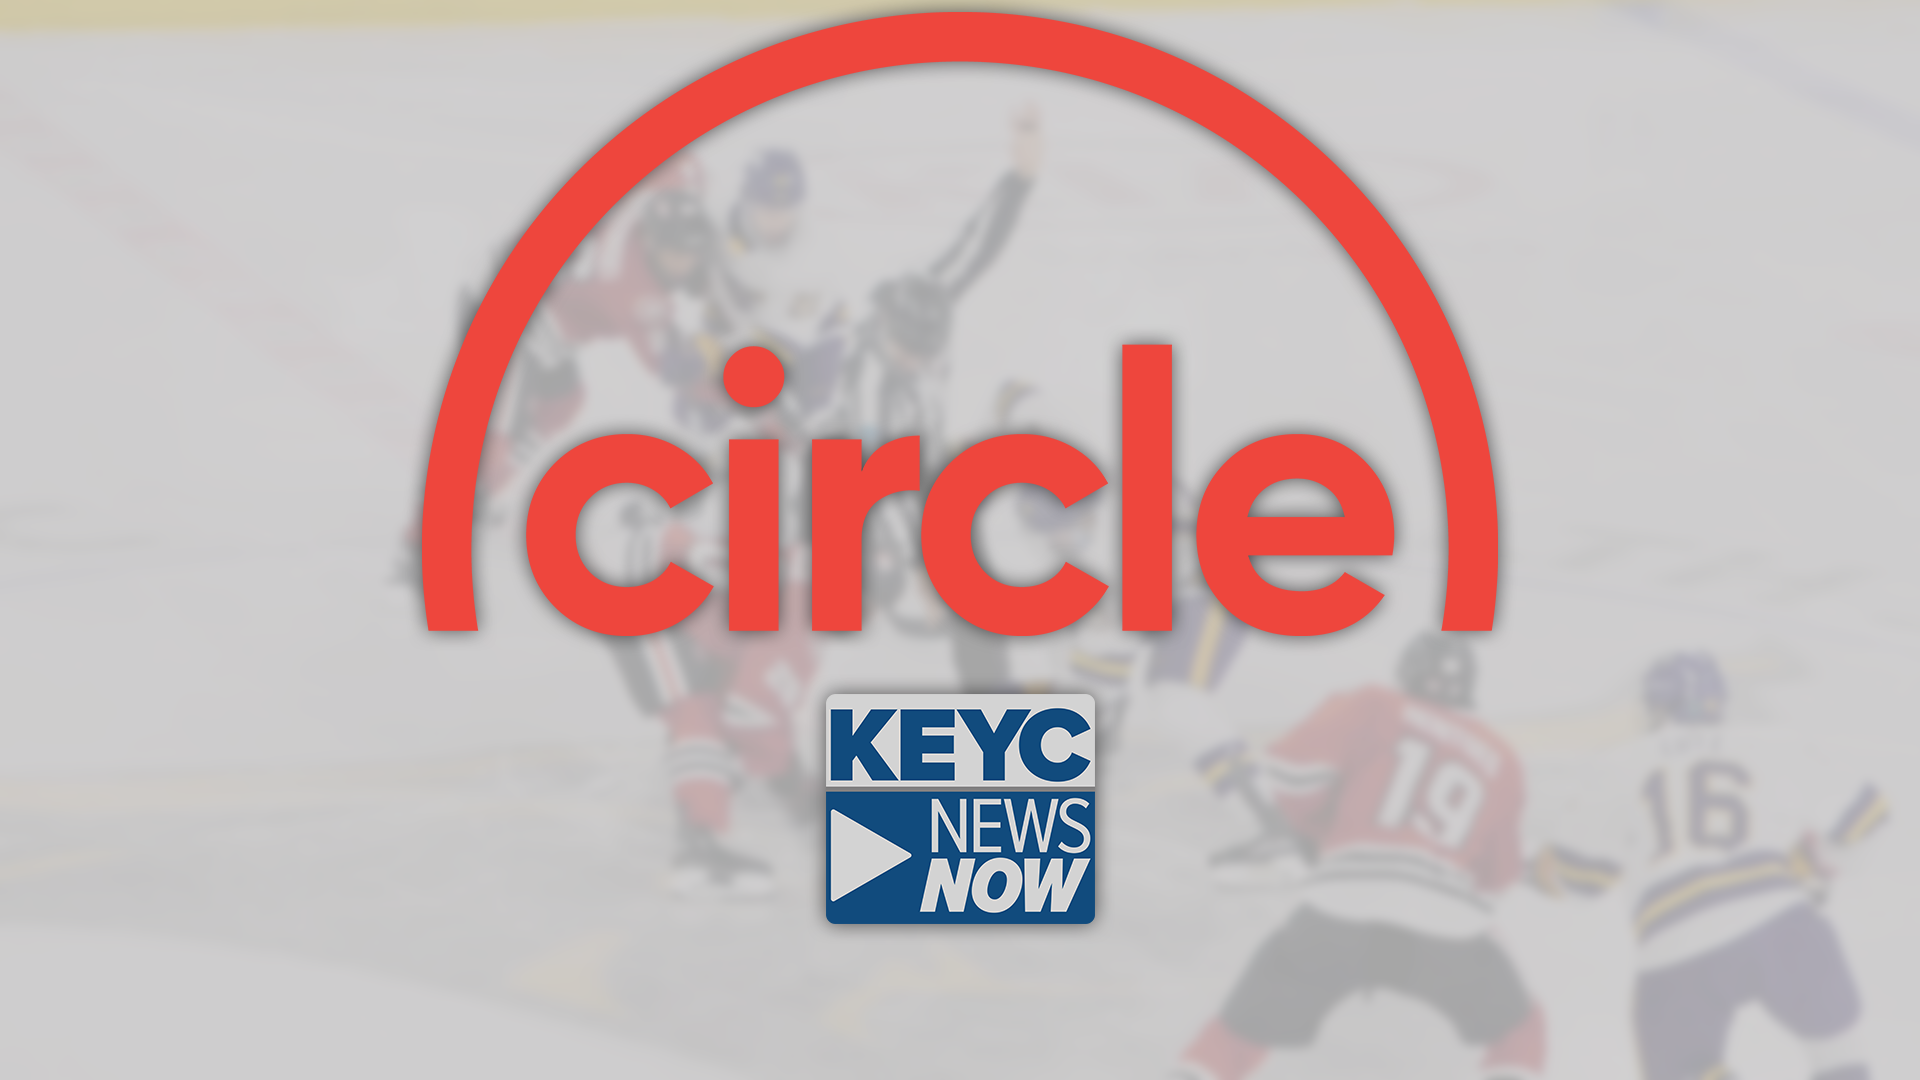 KEYC adds new channel Circle; to broadcast MSU Mankato Mens home hockey games